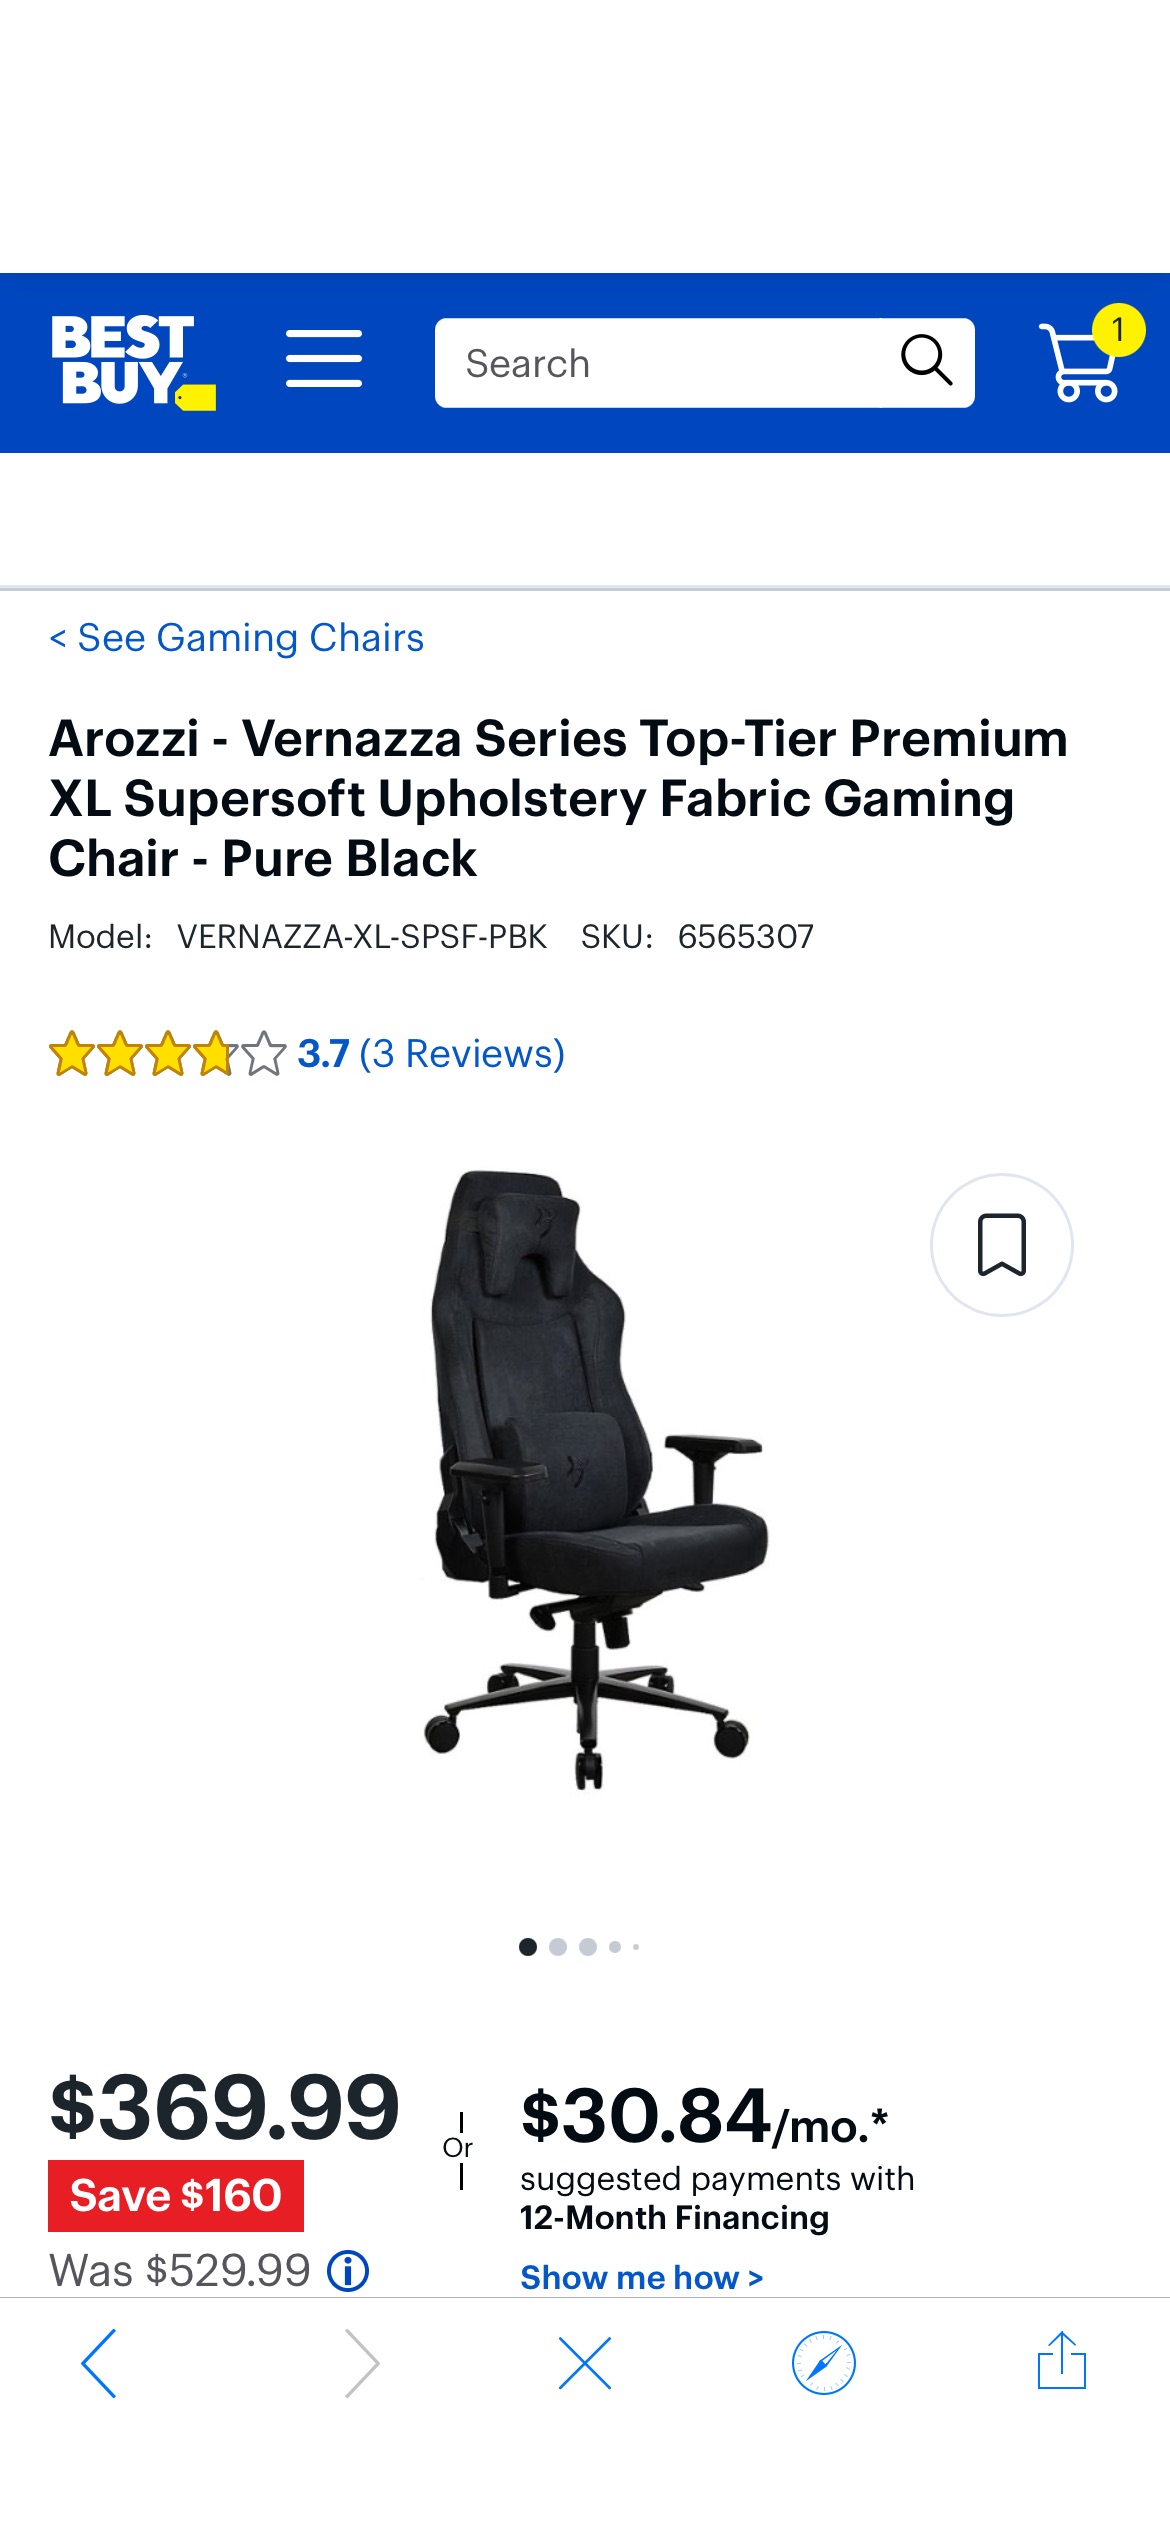 Arozzi Vernazza Series Top-Tier Premium XL Supersoft Upholstery Fabric Gaming Chair Pure Black VERNAZZA-XL-SPSF-PBK - Best Buy